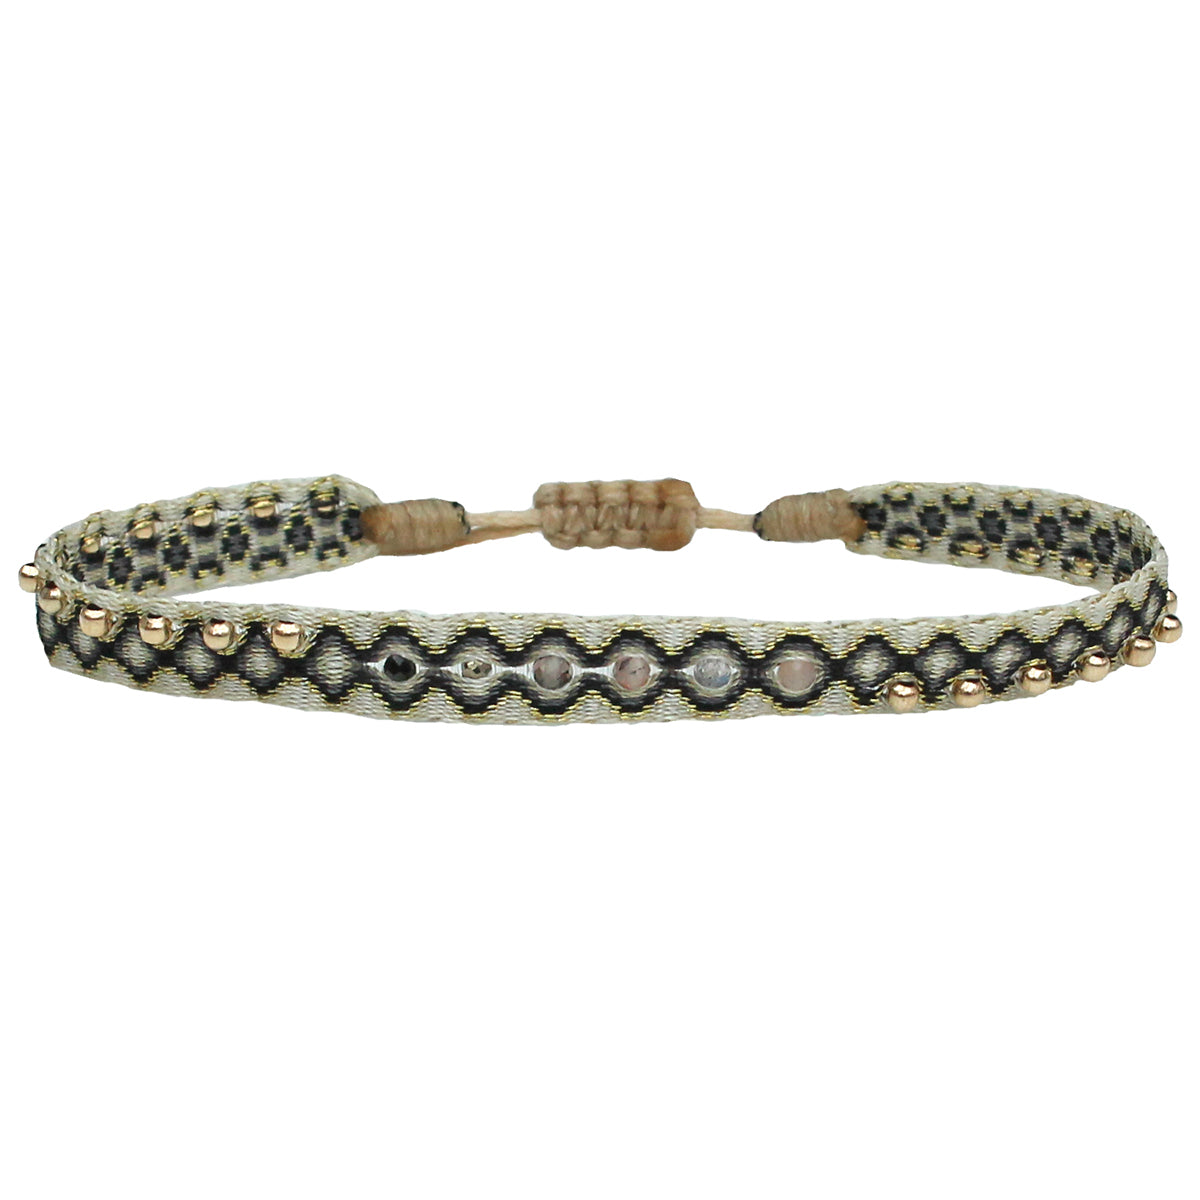 MAJESTIC HANDWOVEN BRACELET IN GOLD AND BLACK TONES